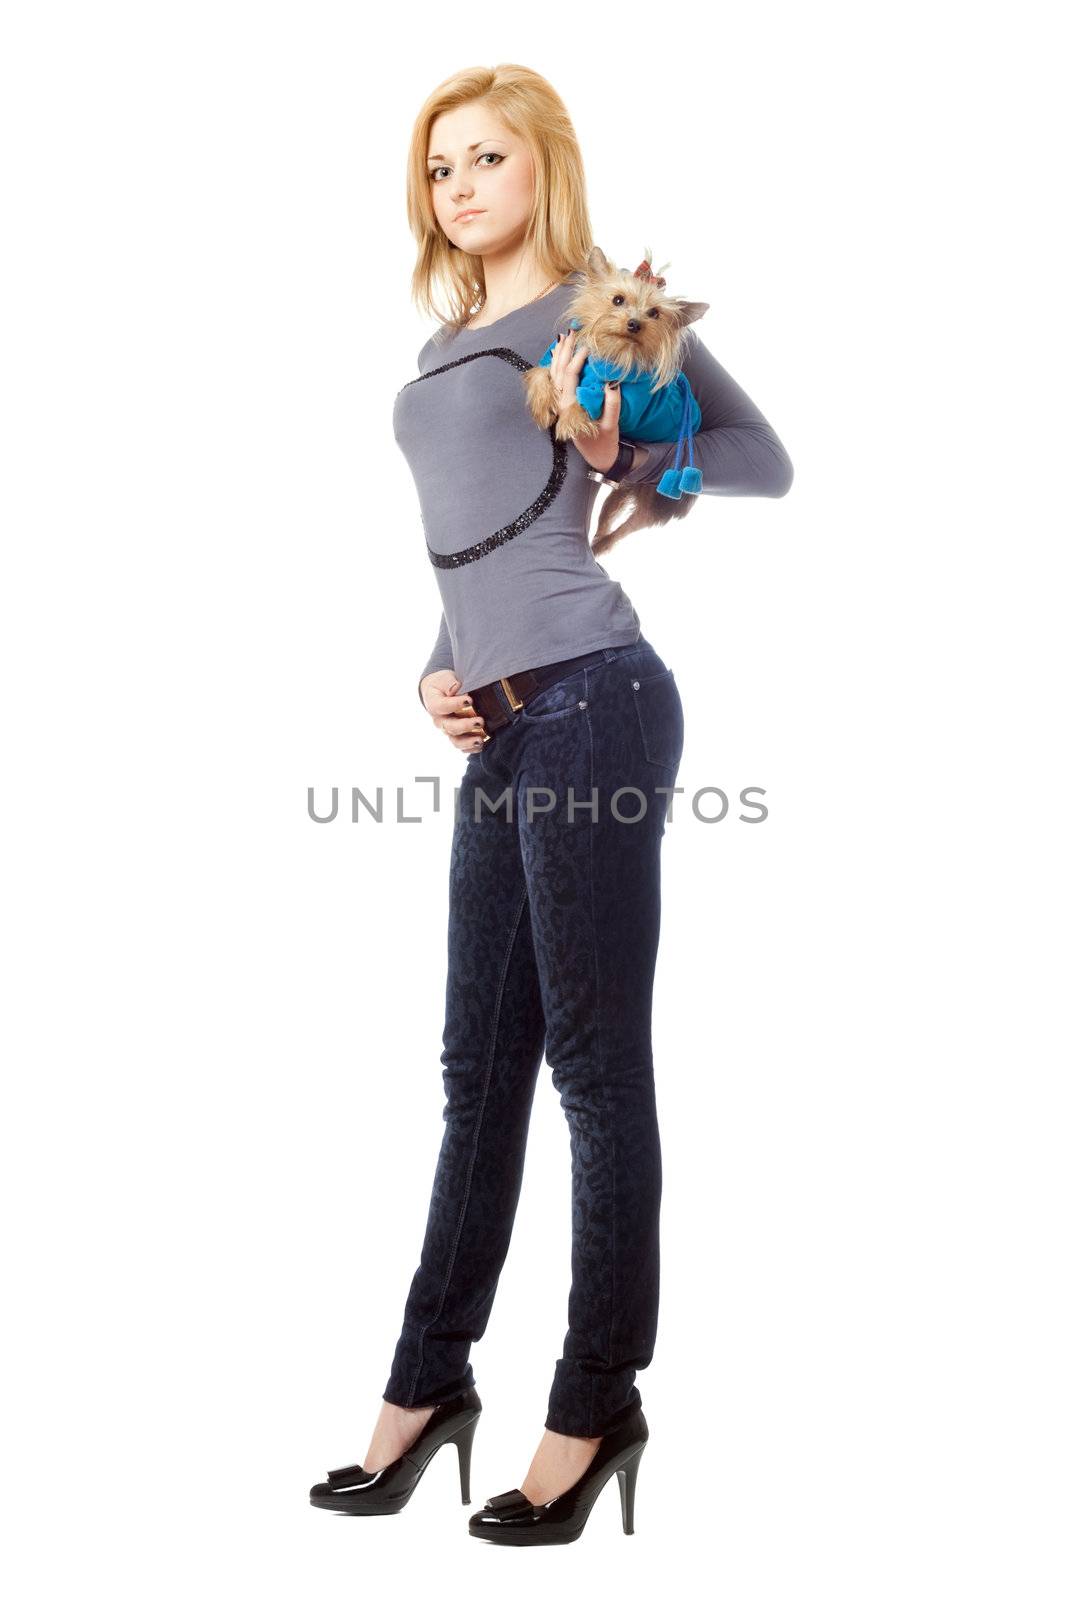 Attractive blonde posing with puppy. Isolated on white